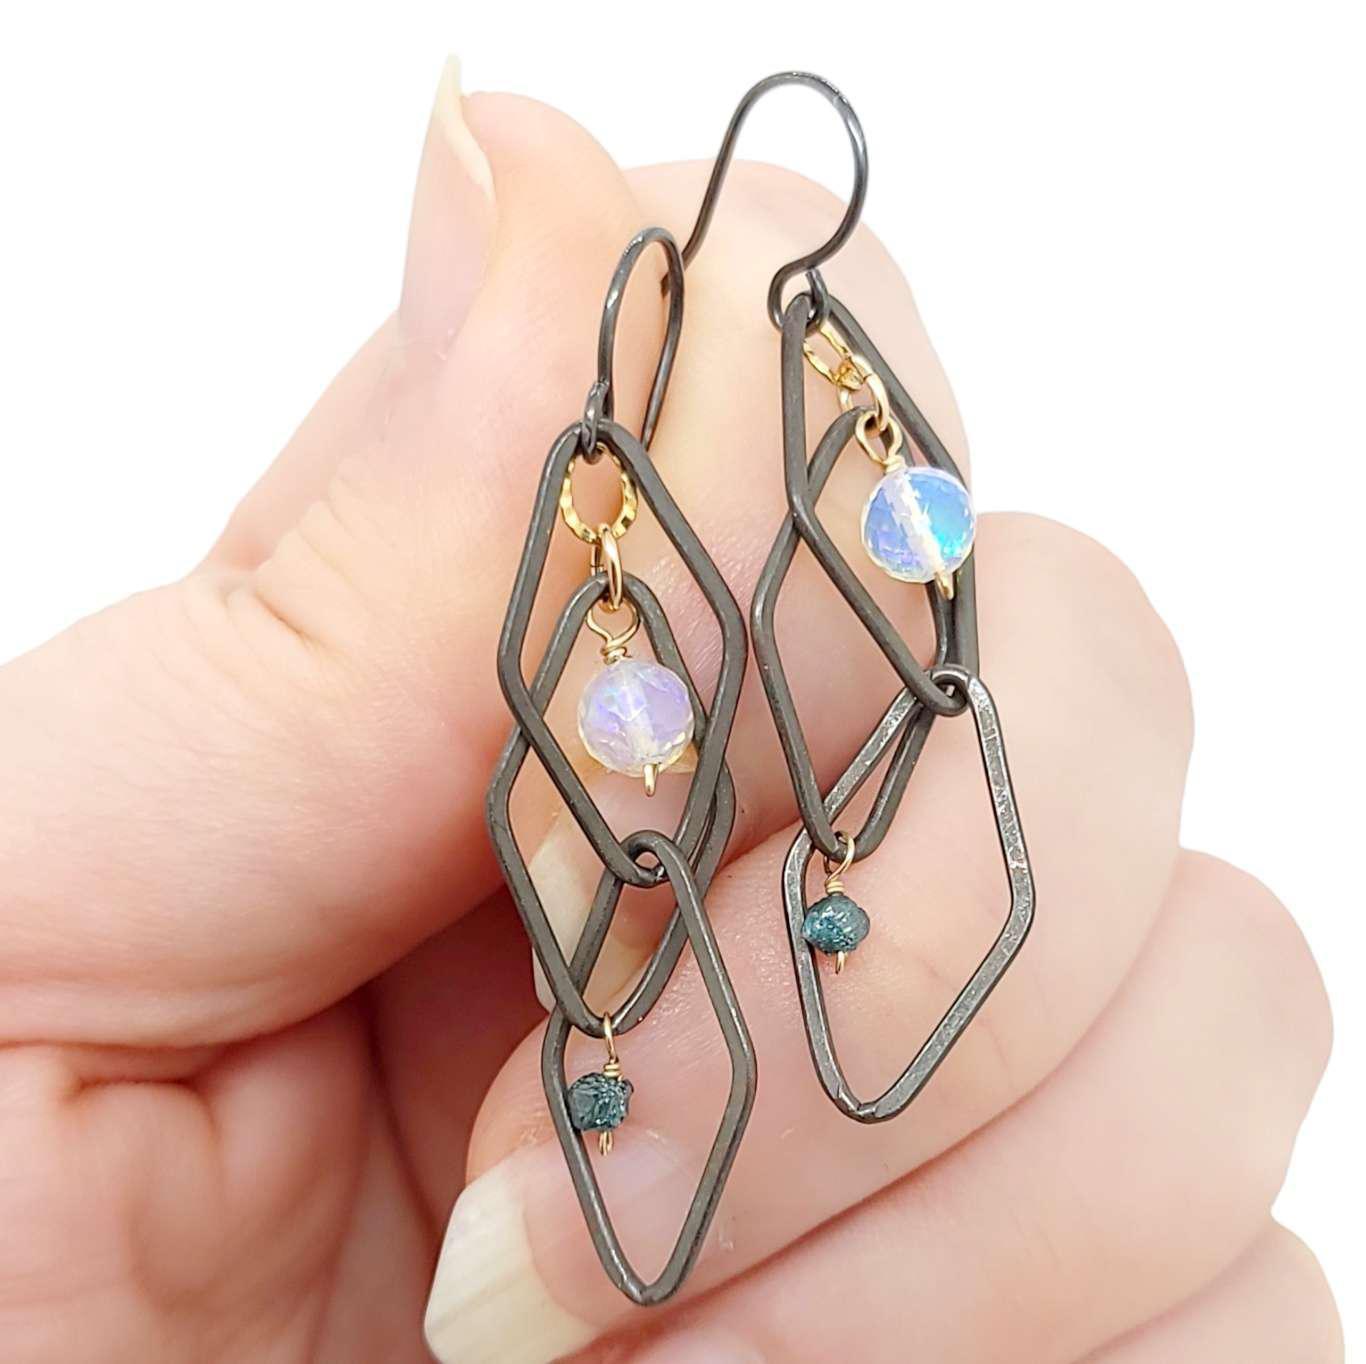 Earrings - Triple Floating Diamond Frames with Opal and Blue Diamond by Calliope Jewelry